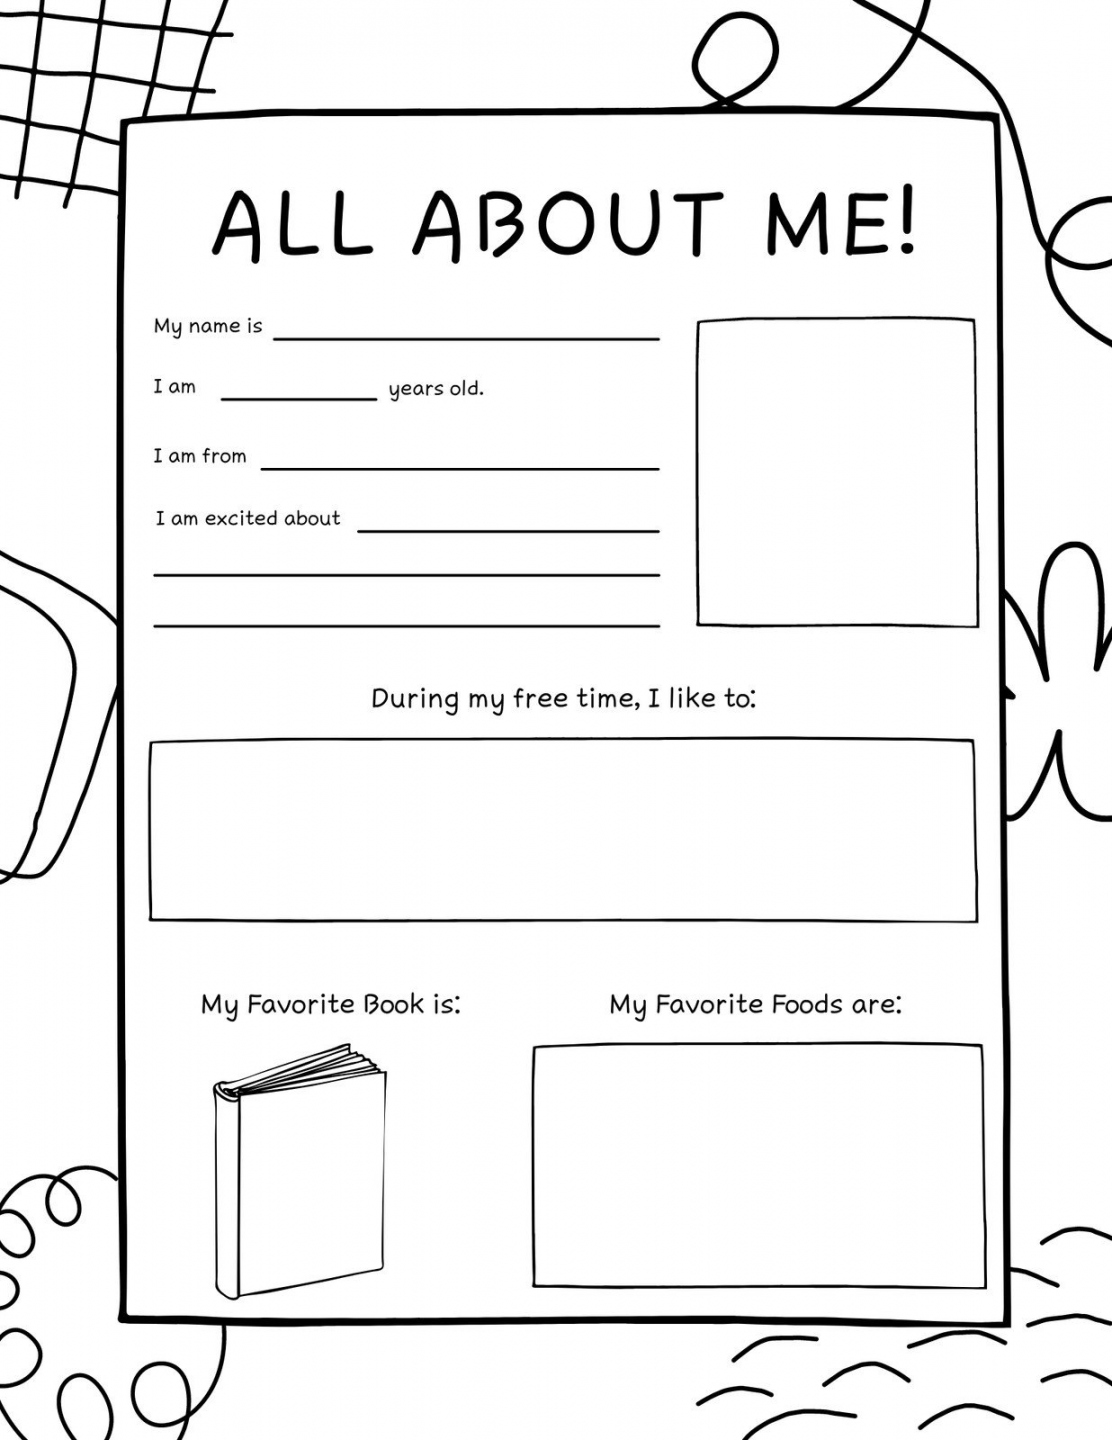 Free and printable All About Me worksheet templates  Canva - FREE Printables - All About Me Free Printable